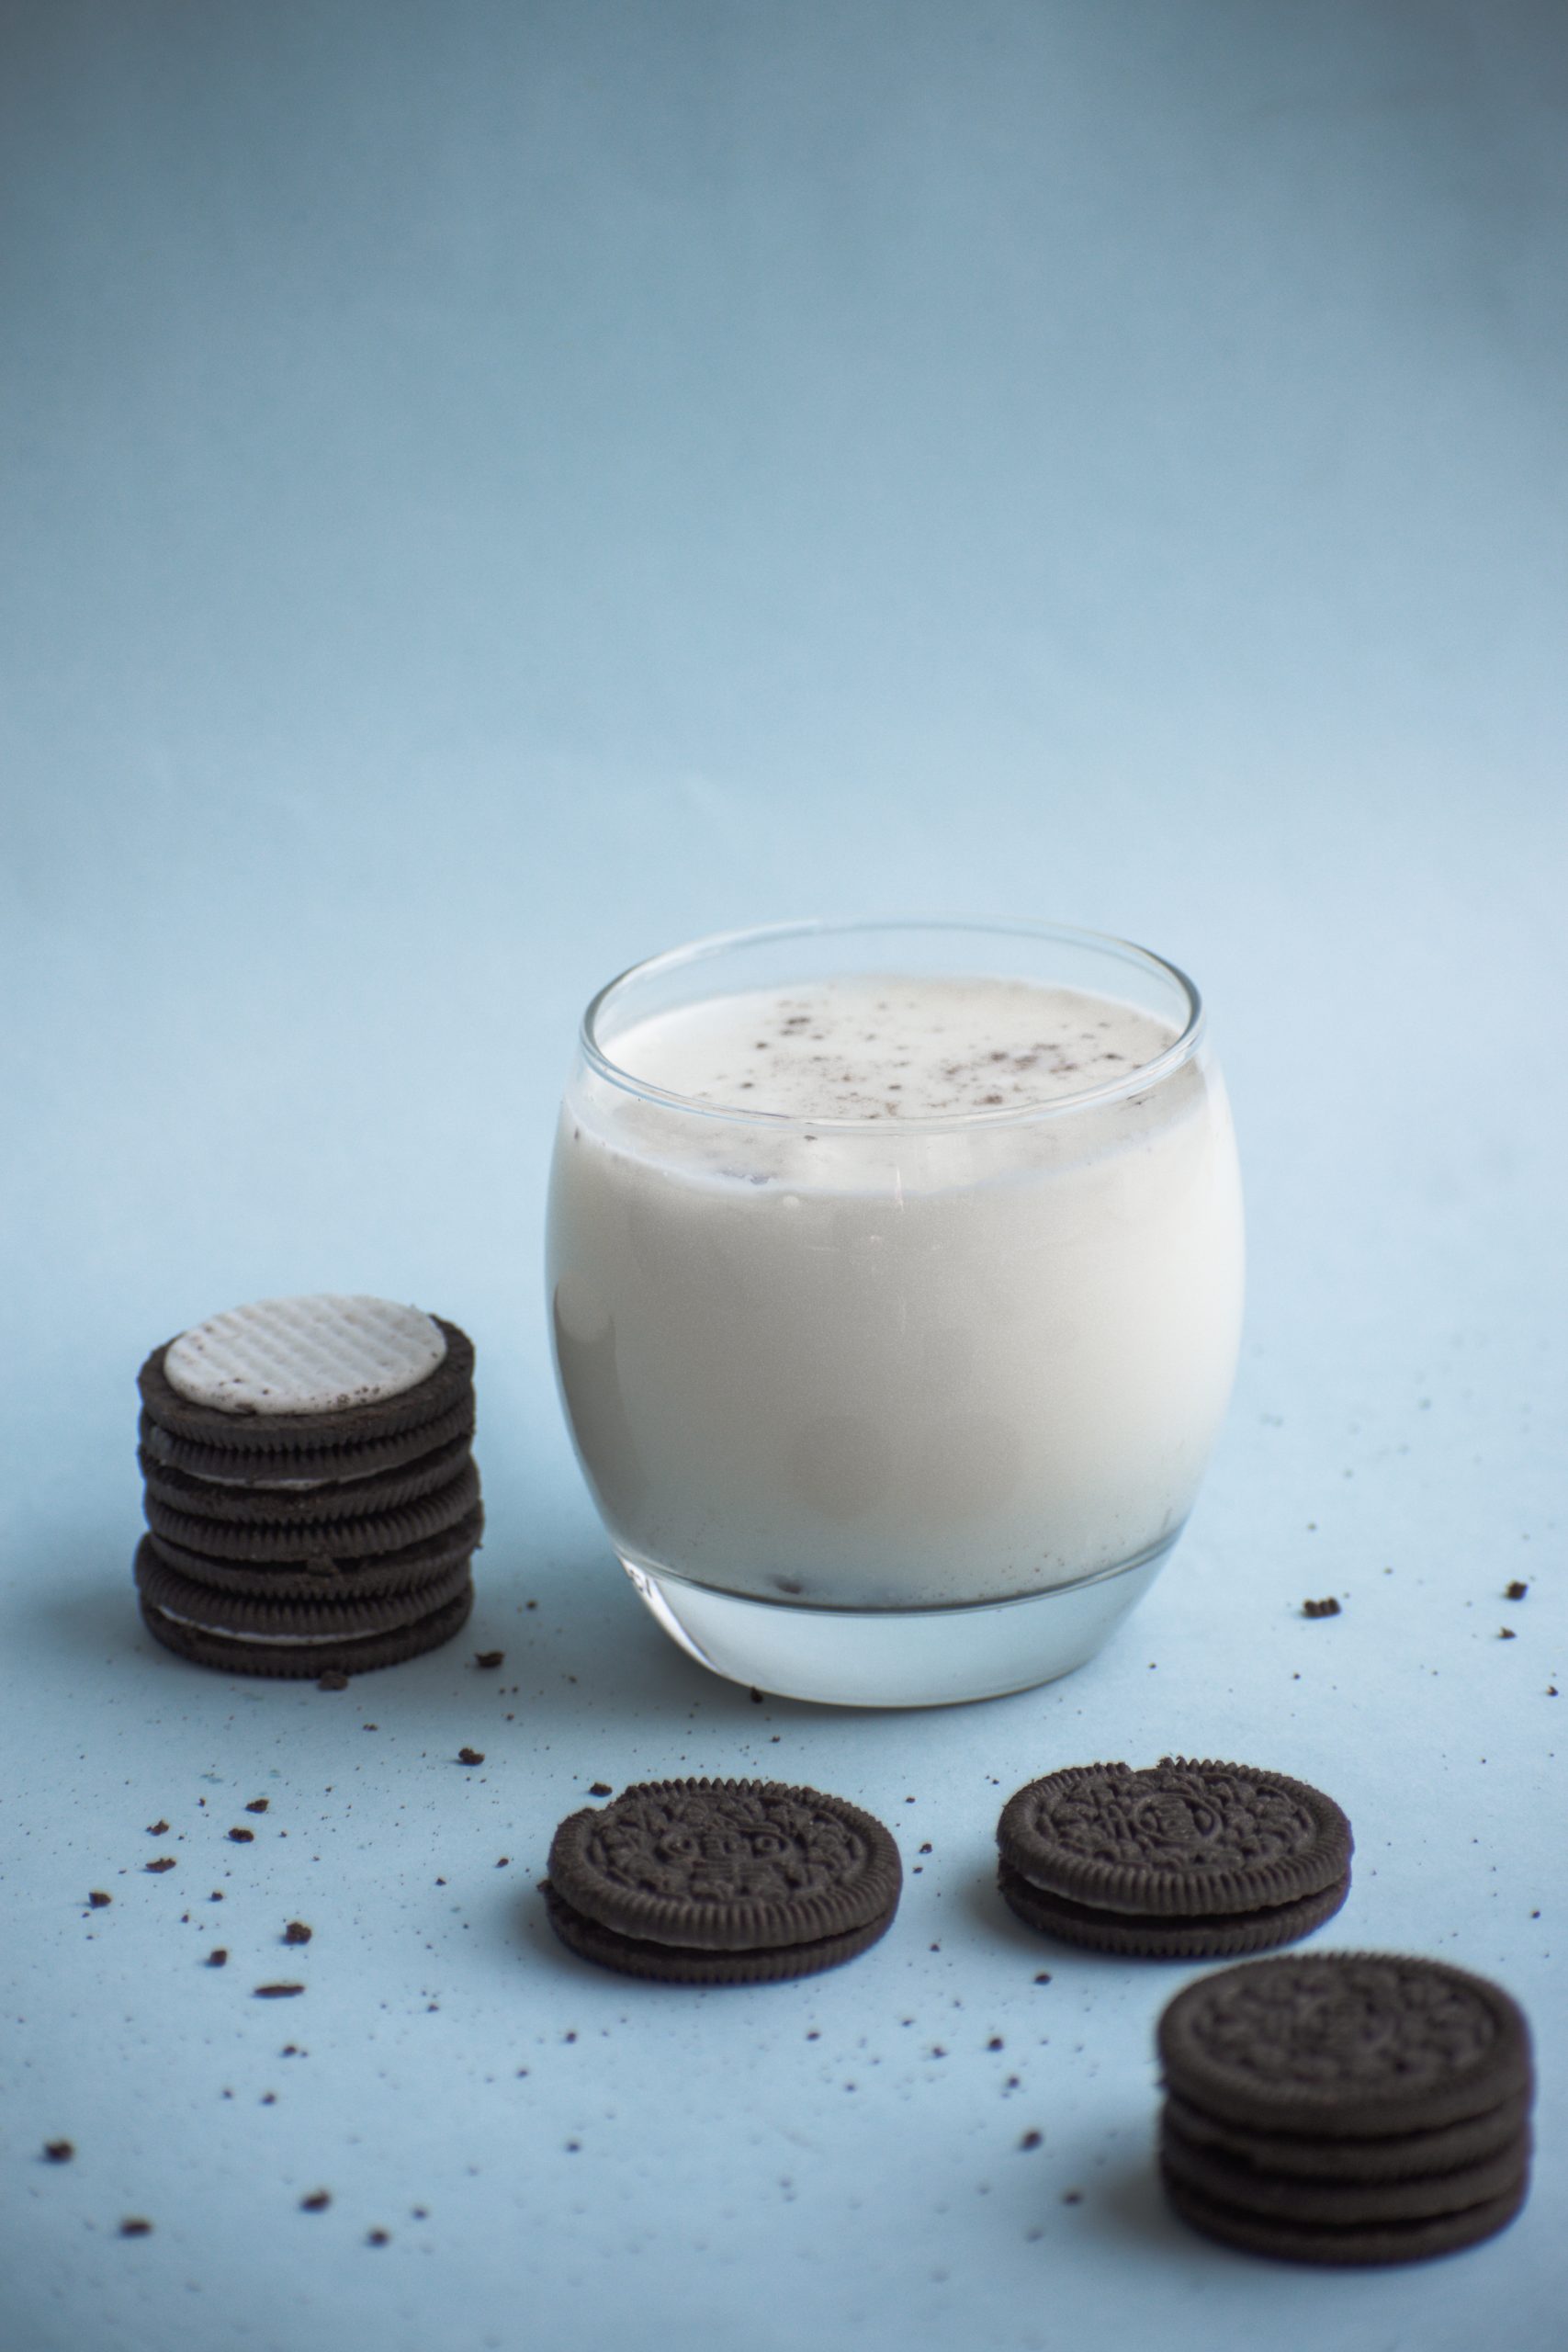 Milk in the glass and Oreo biscuits